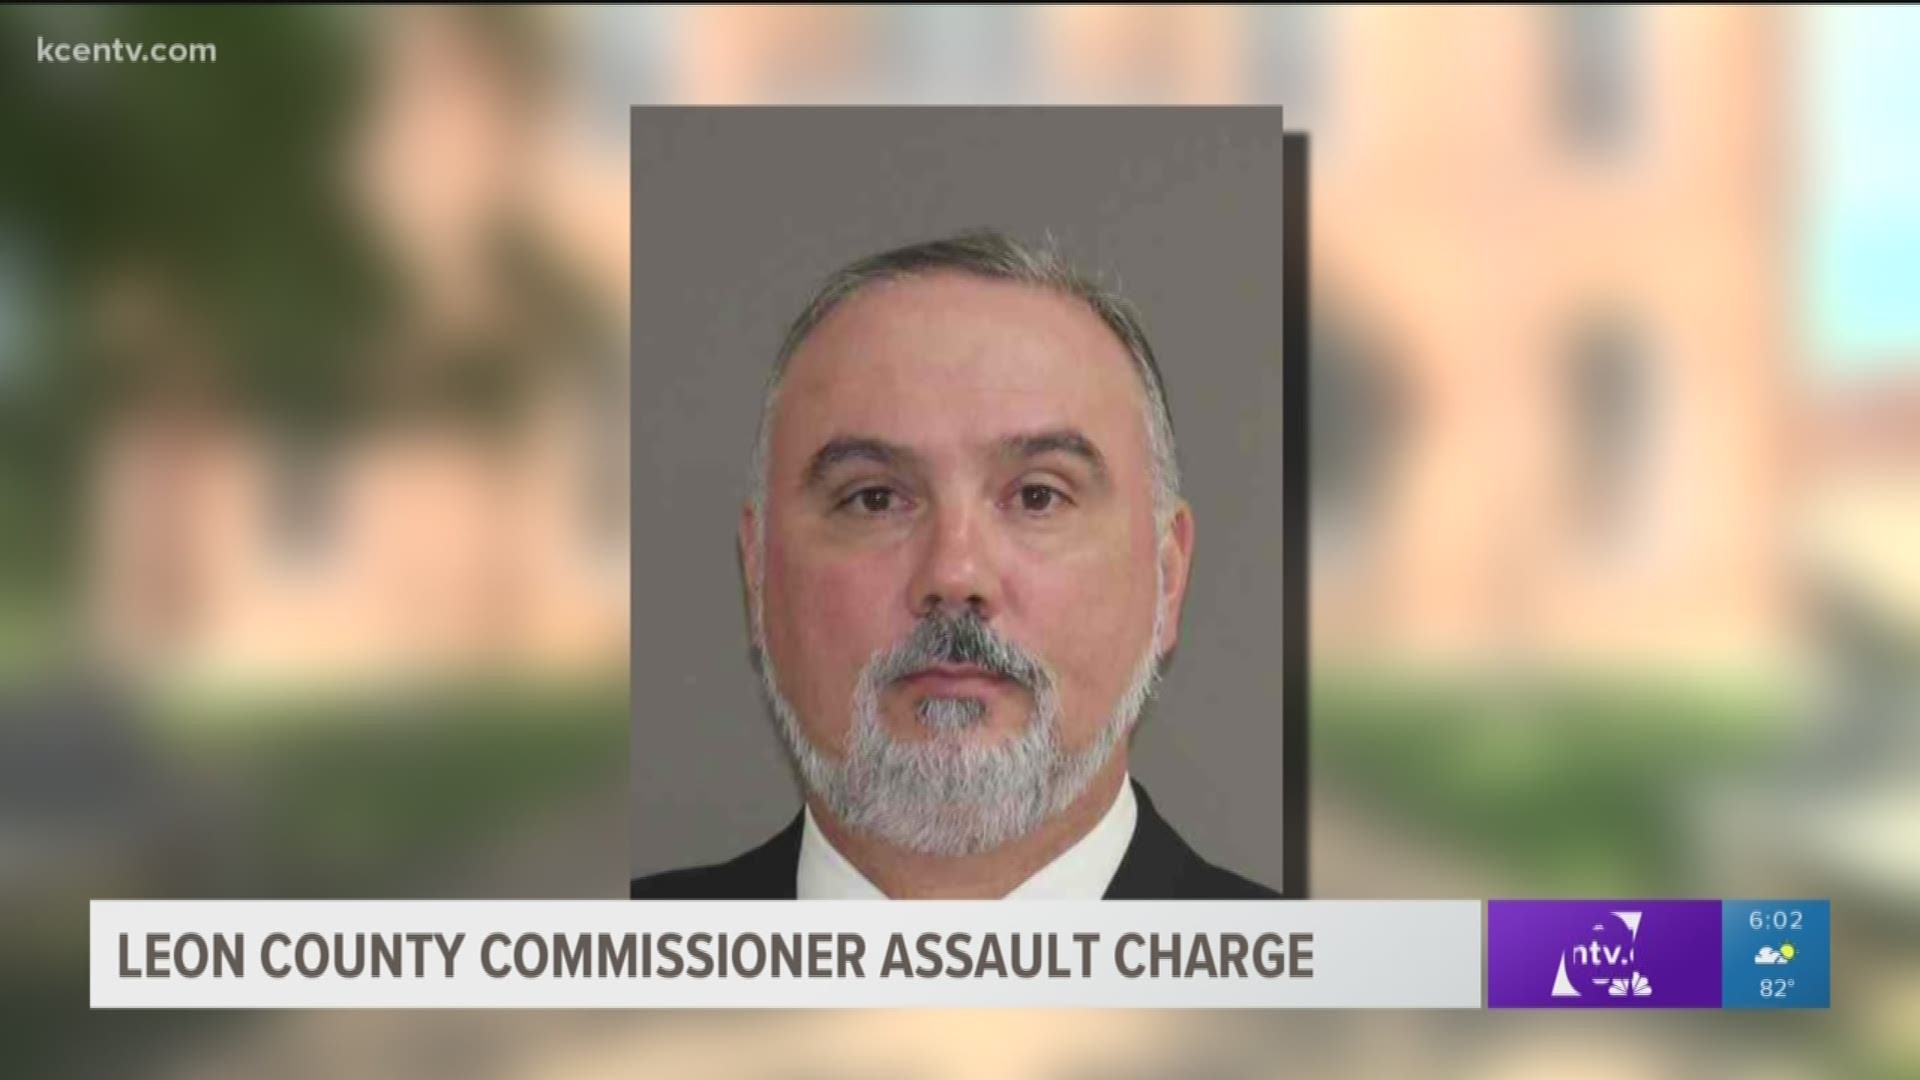 Because William Dean Stanford pleaded guilty to a misdemeanor it will not impact his job as third precinct county commissioner, but voters can call for his resignation.